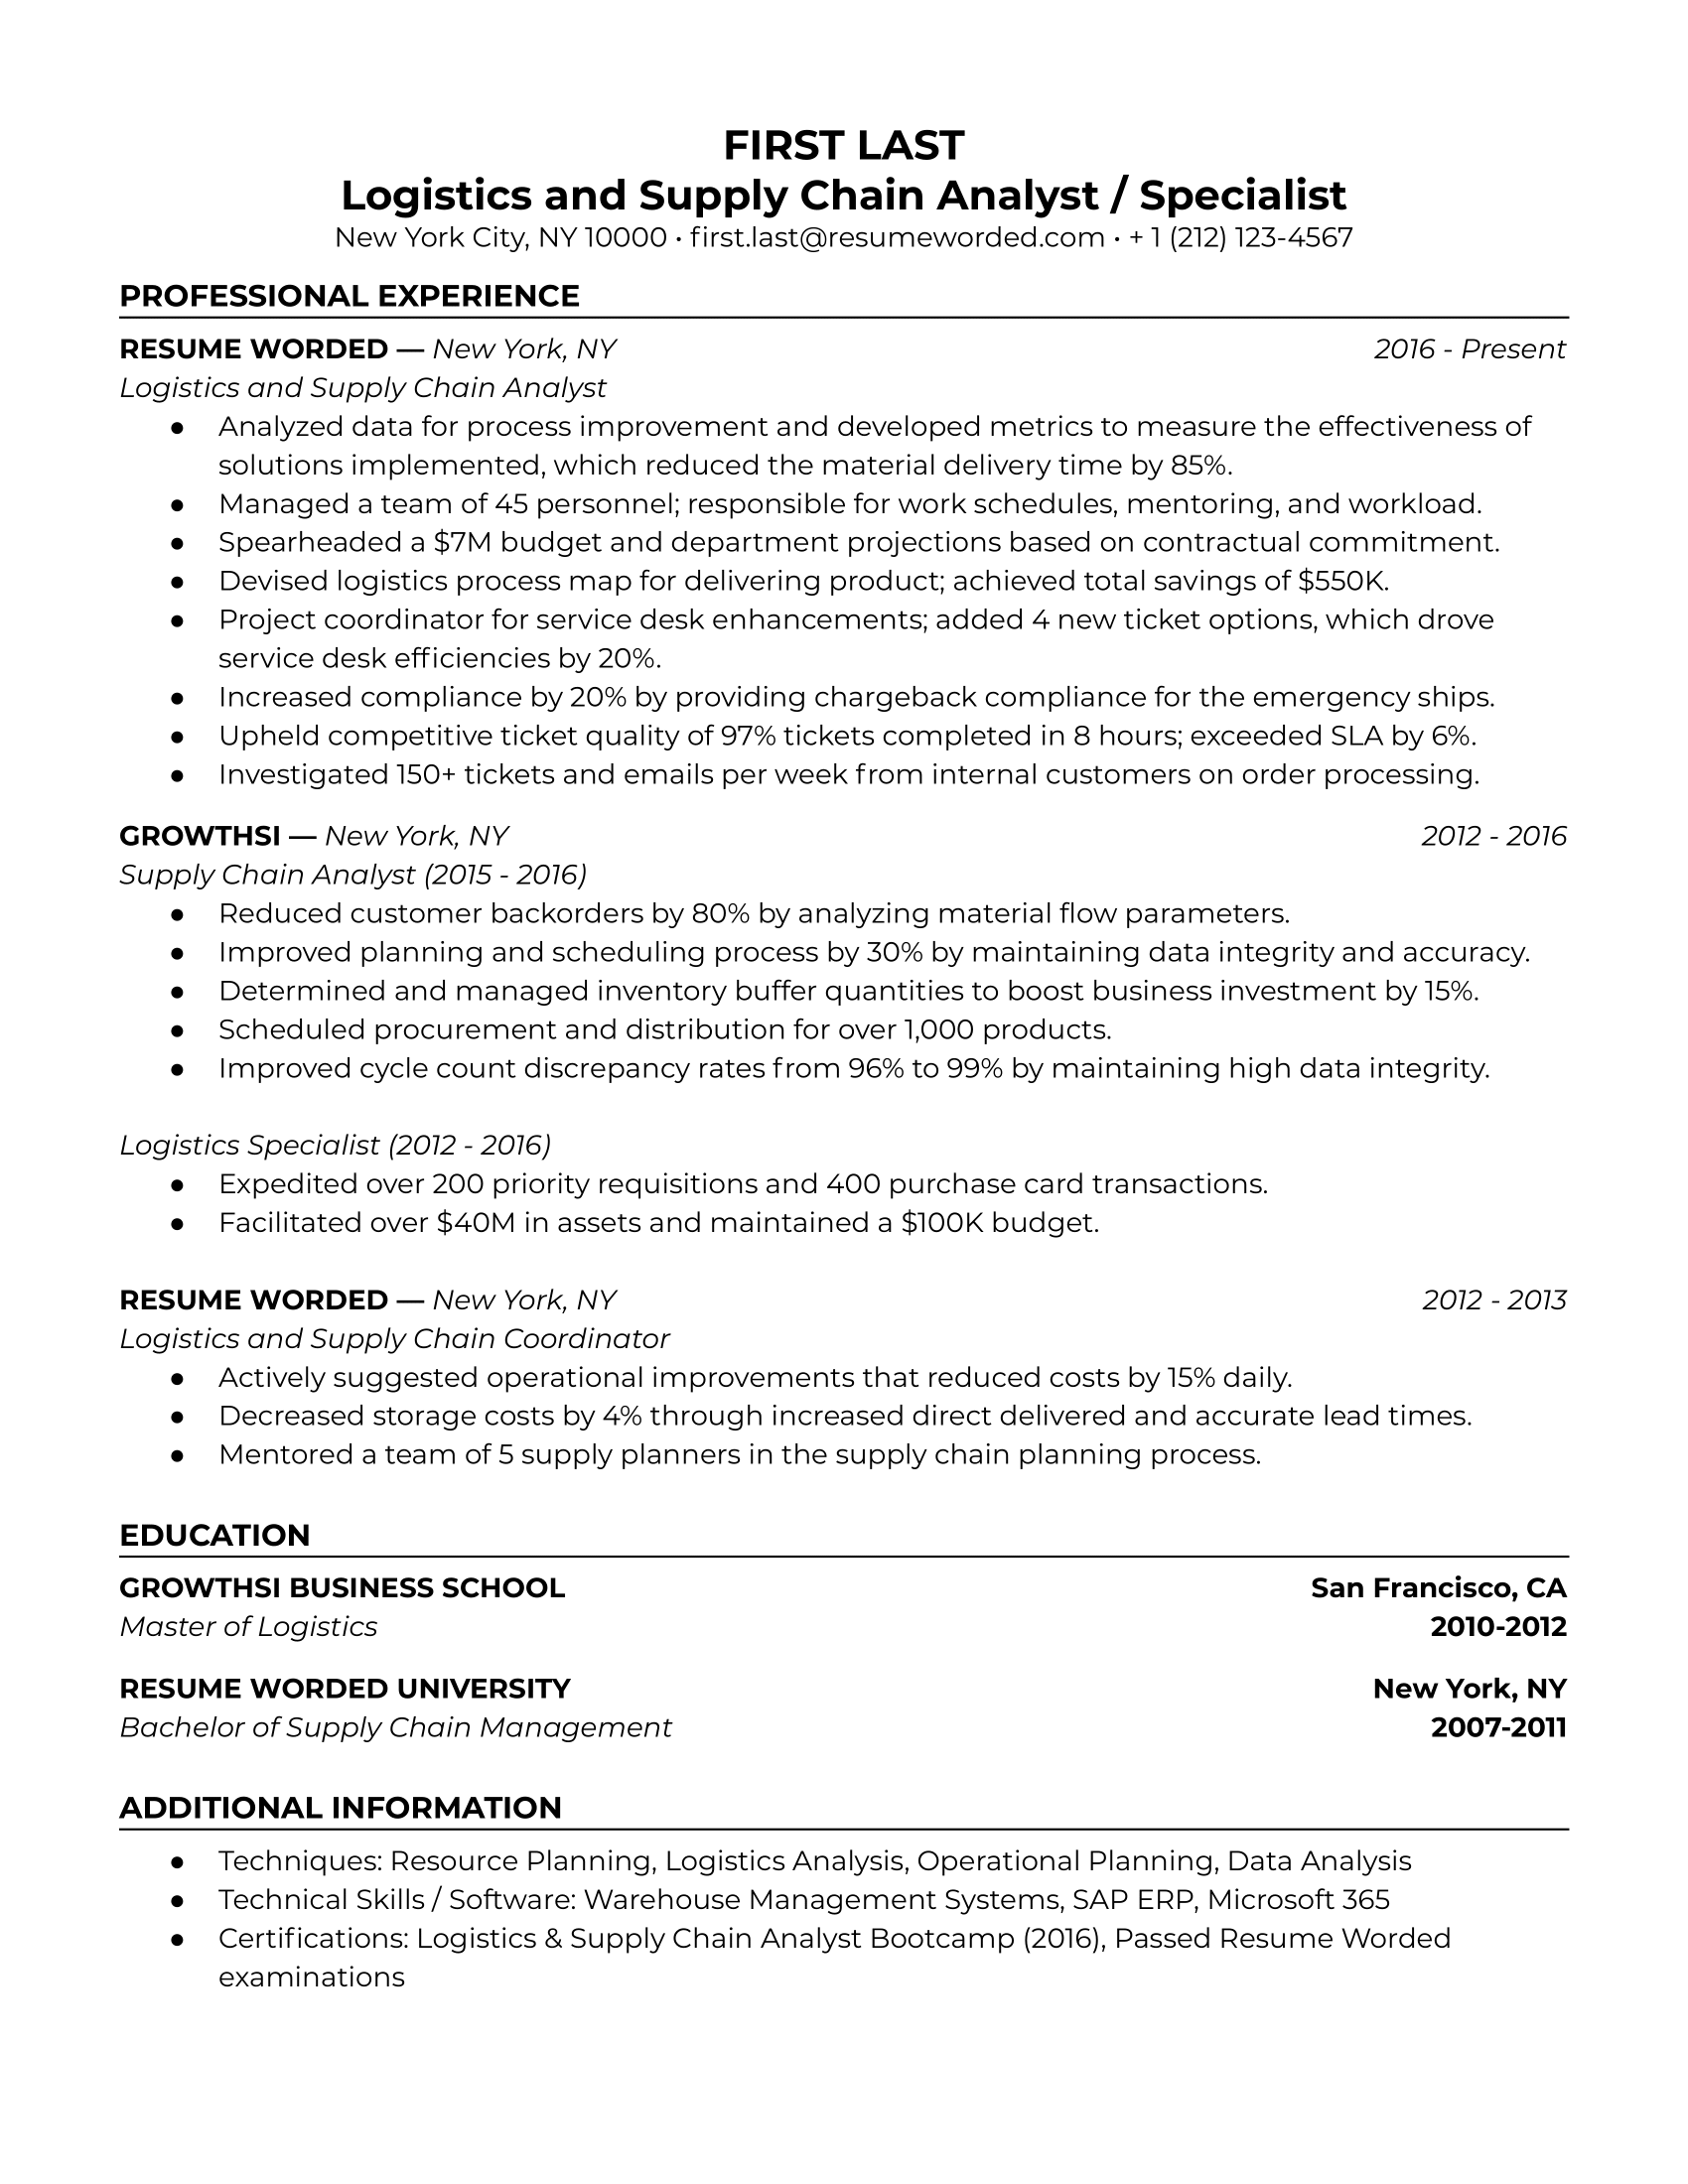 Logistics and Supply Chain Analyst / Specialist Resume Sample